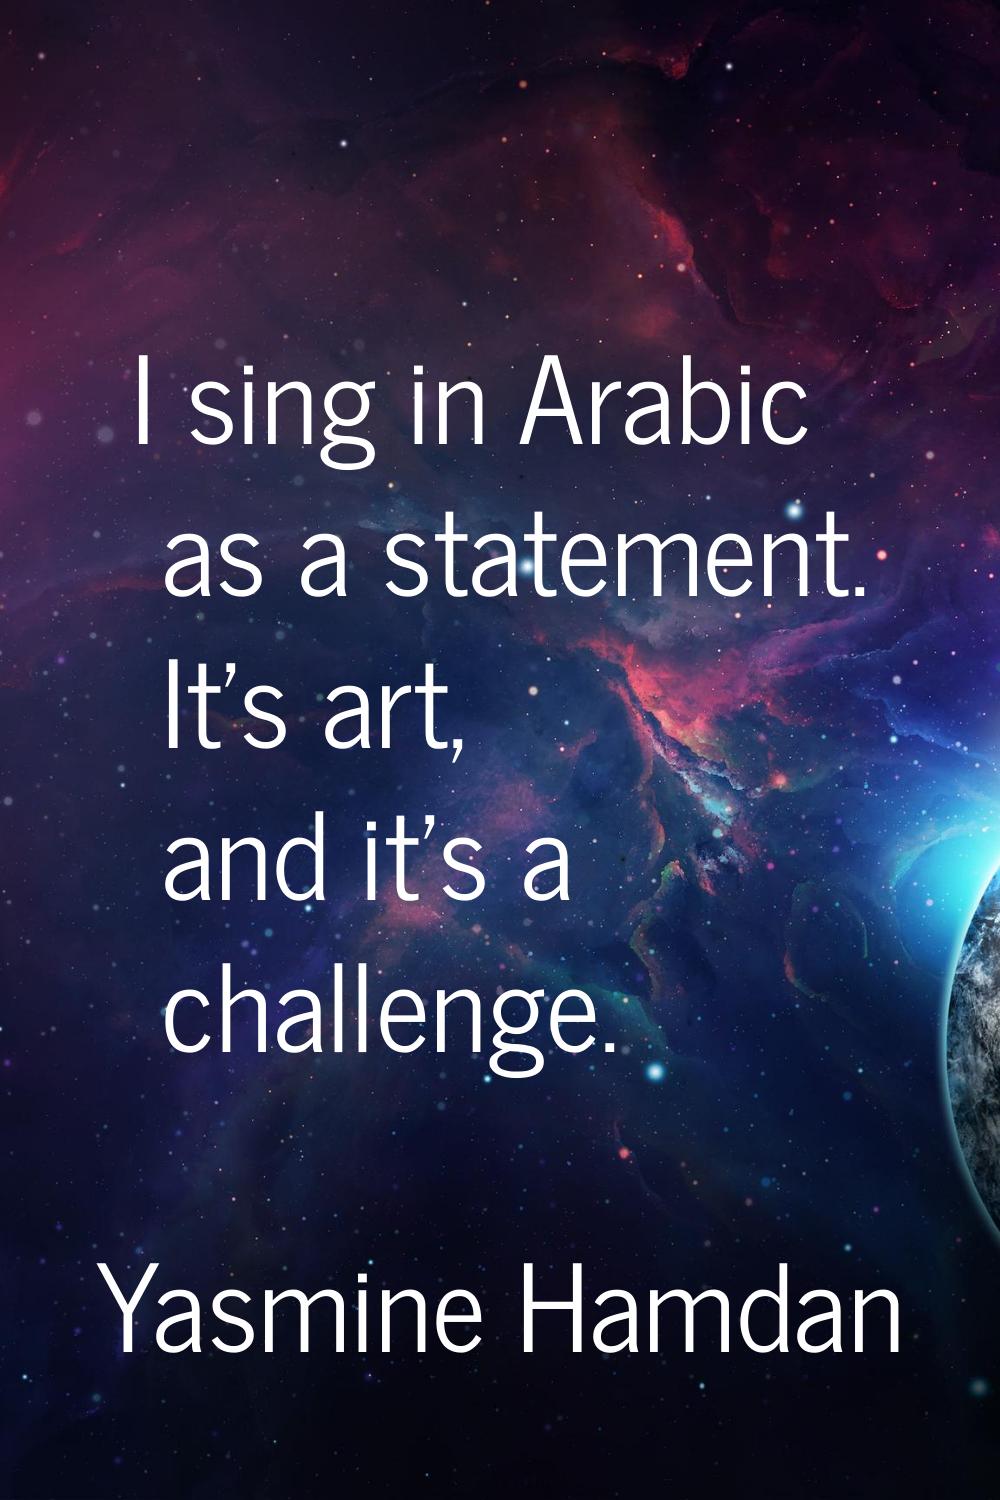 I sing in Arabic as a statement. It's art, and it's a challenge.